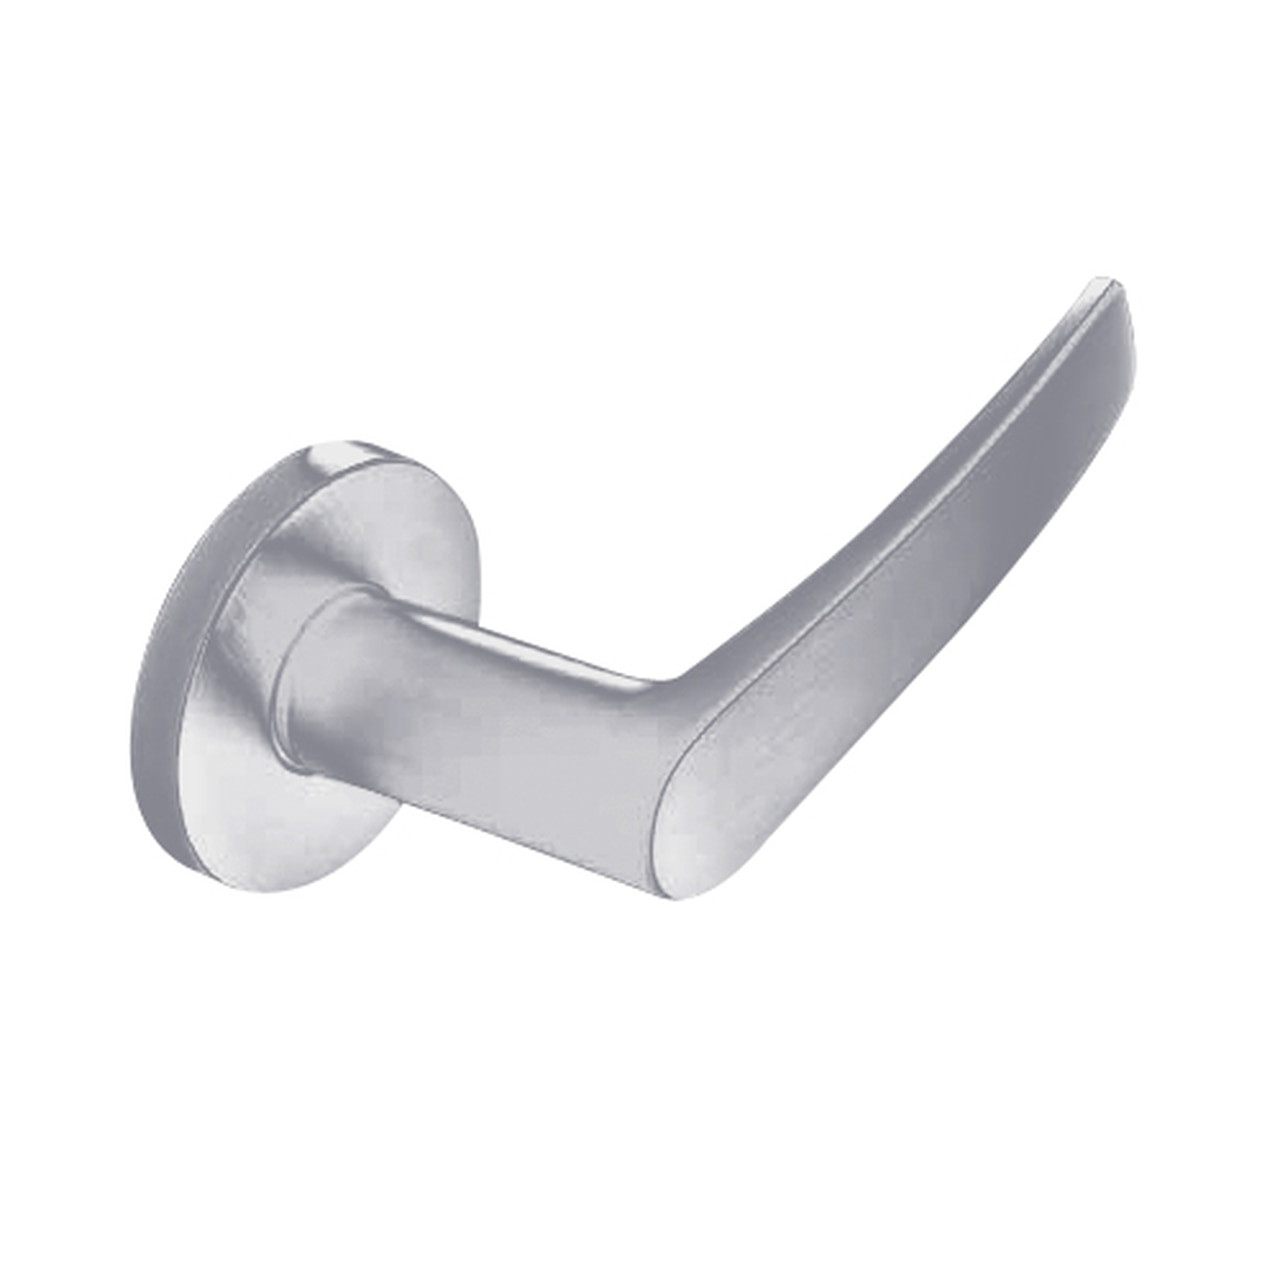 ML2042-ASB-626-LC Corbin Russwin ML2000 Series Mortise Entrance Locksets with Armstrong Lever in Satin Chrome